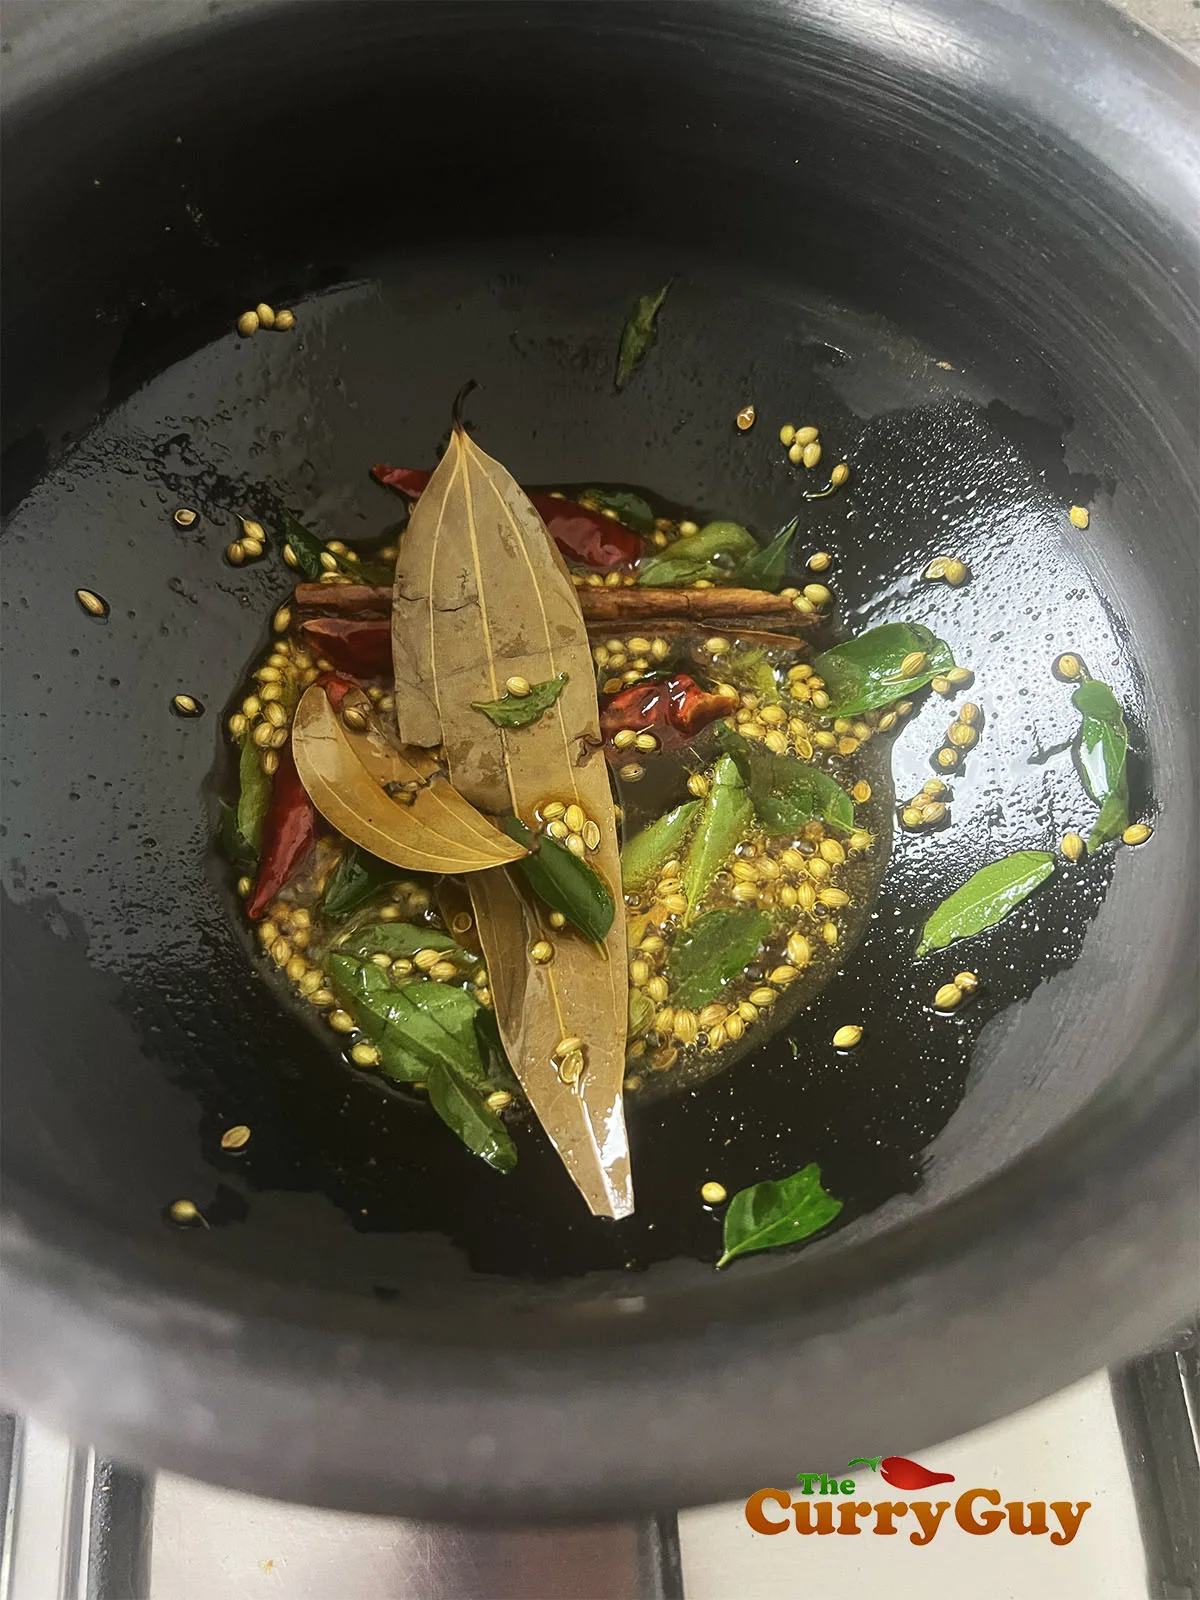 Frying the whole spices and curry leaves.